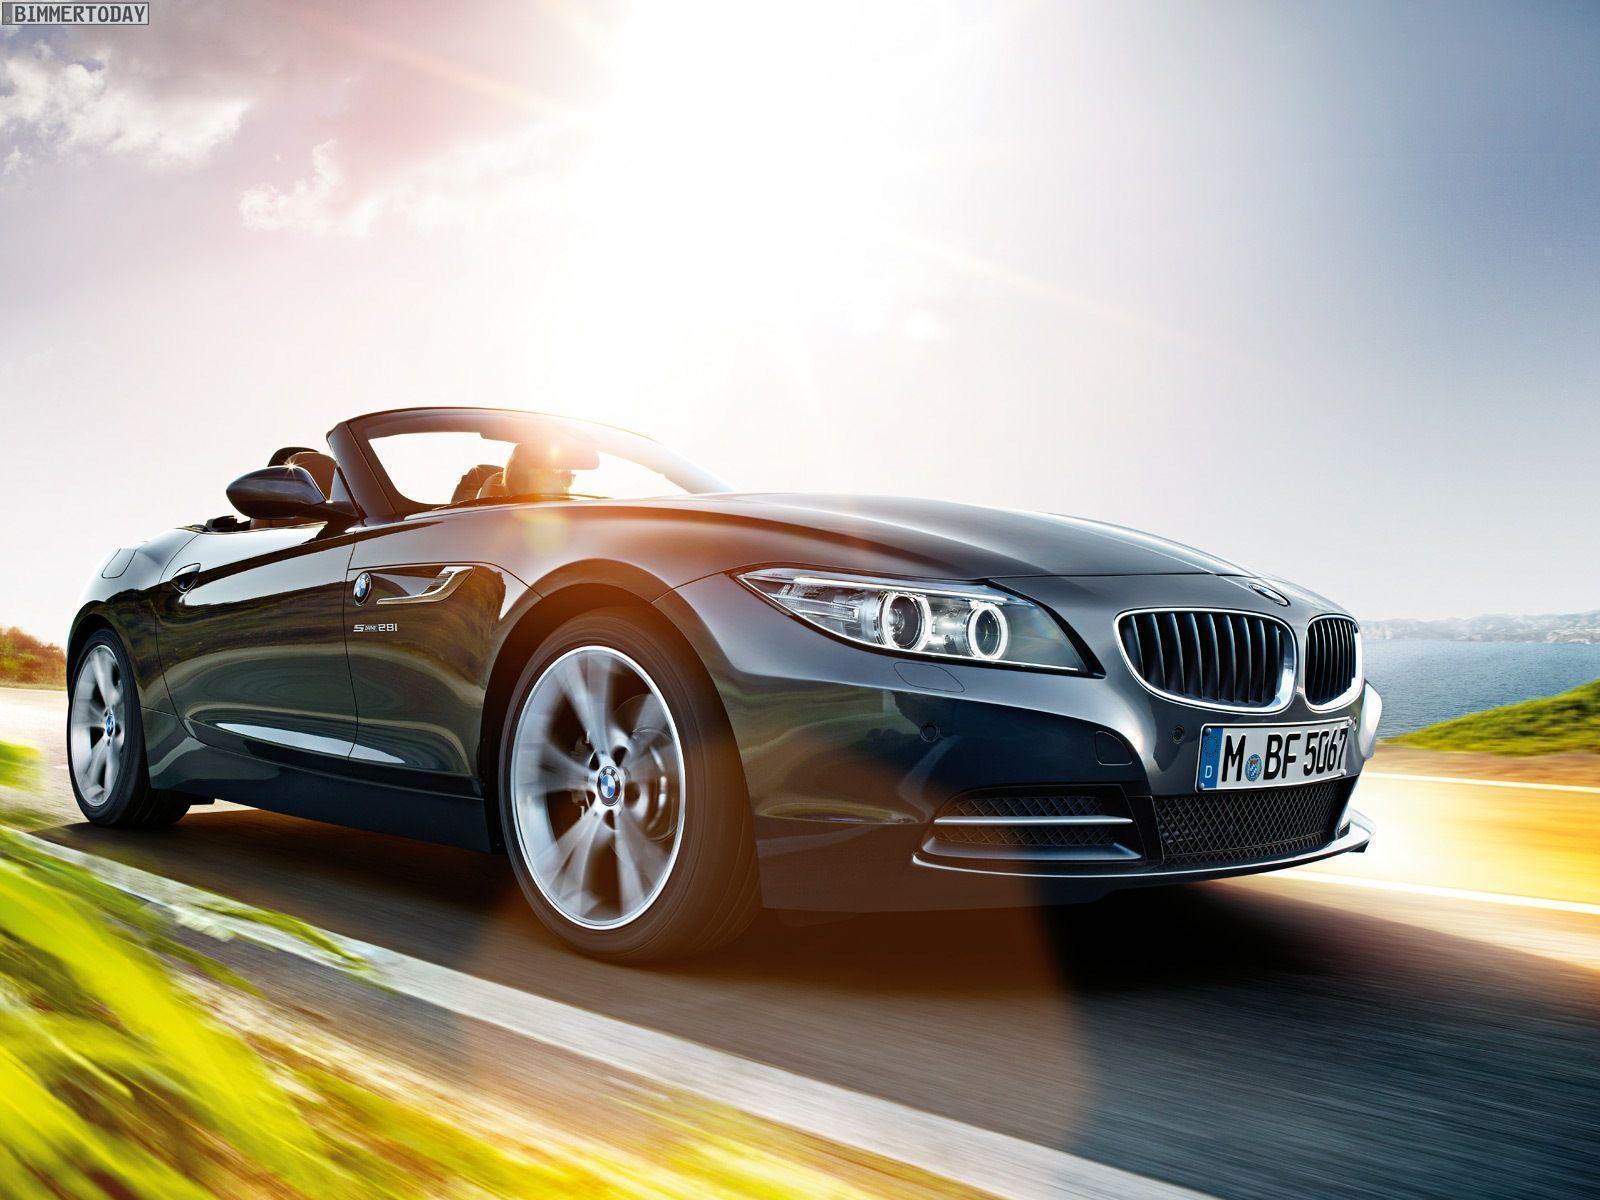 image For > Bmw Z4 Wallpaper 2013